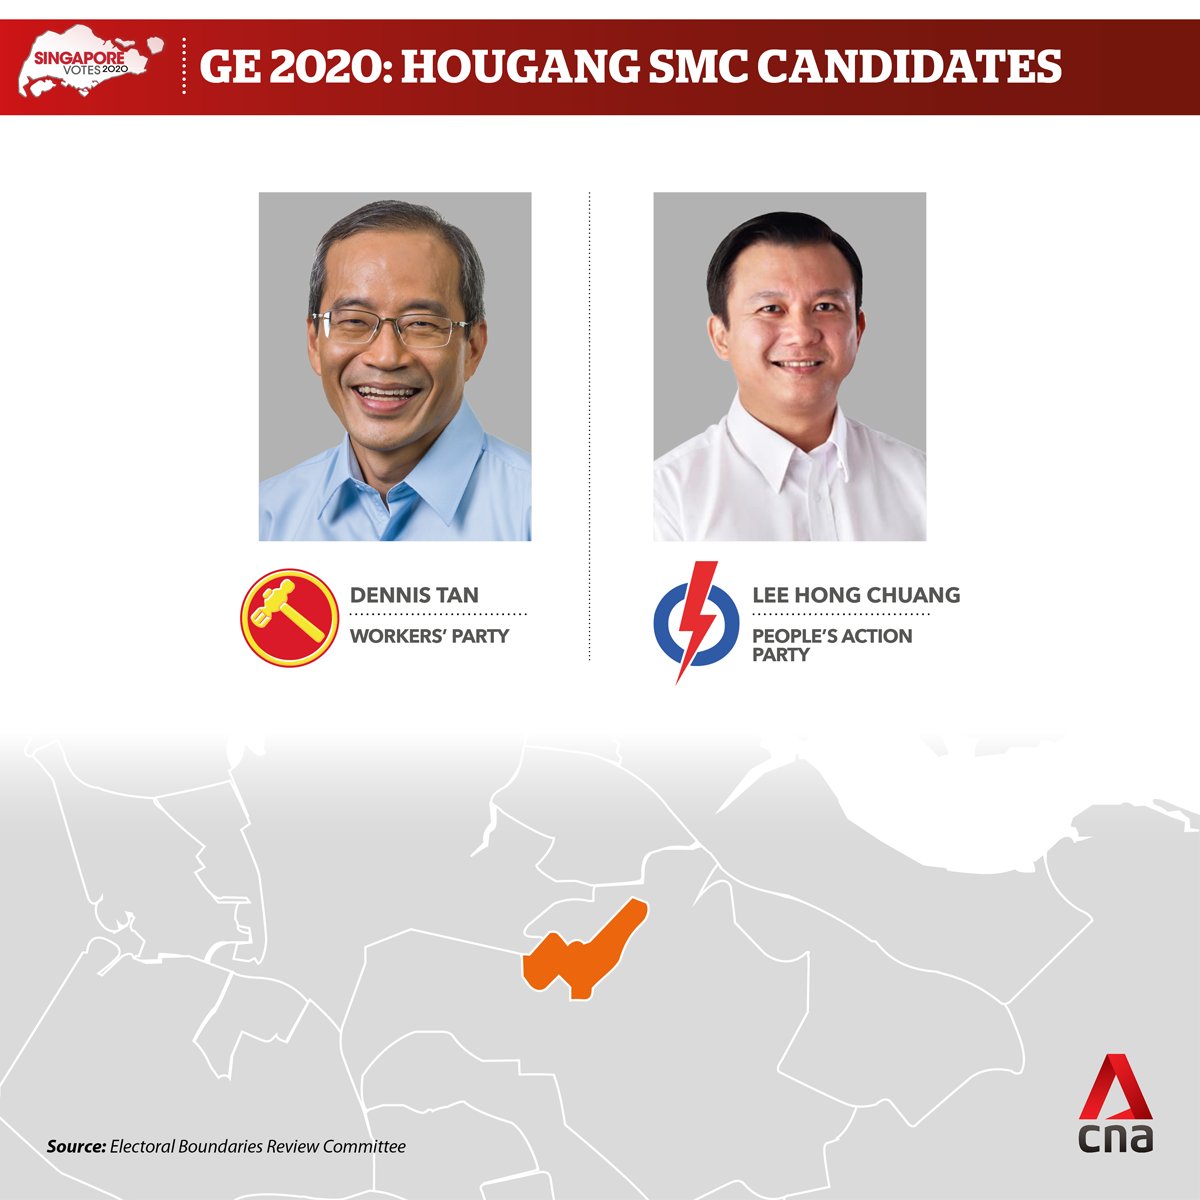  #GE2020  : Dennis Tan will take on PAP contender Lee Hong Chuang as he defends WP's seat in Hougang SMC  https://cna.asia/3ilTCkf 